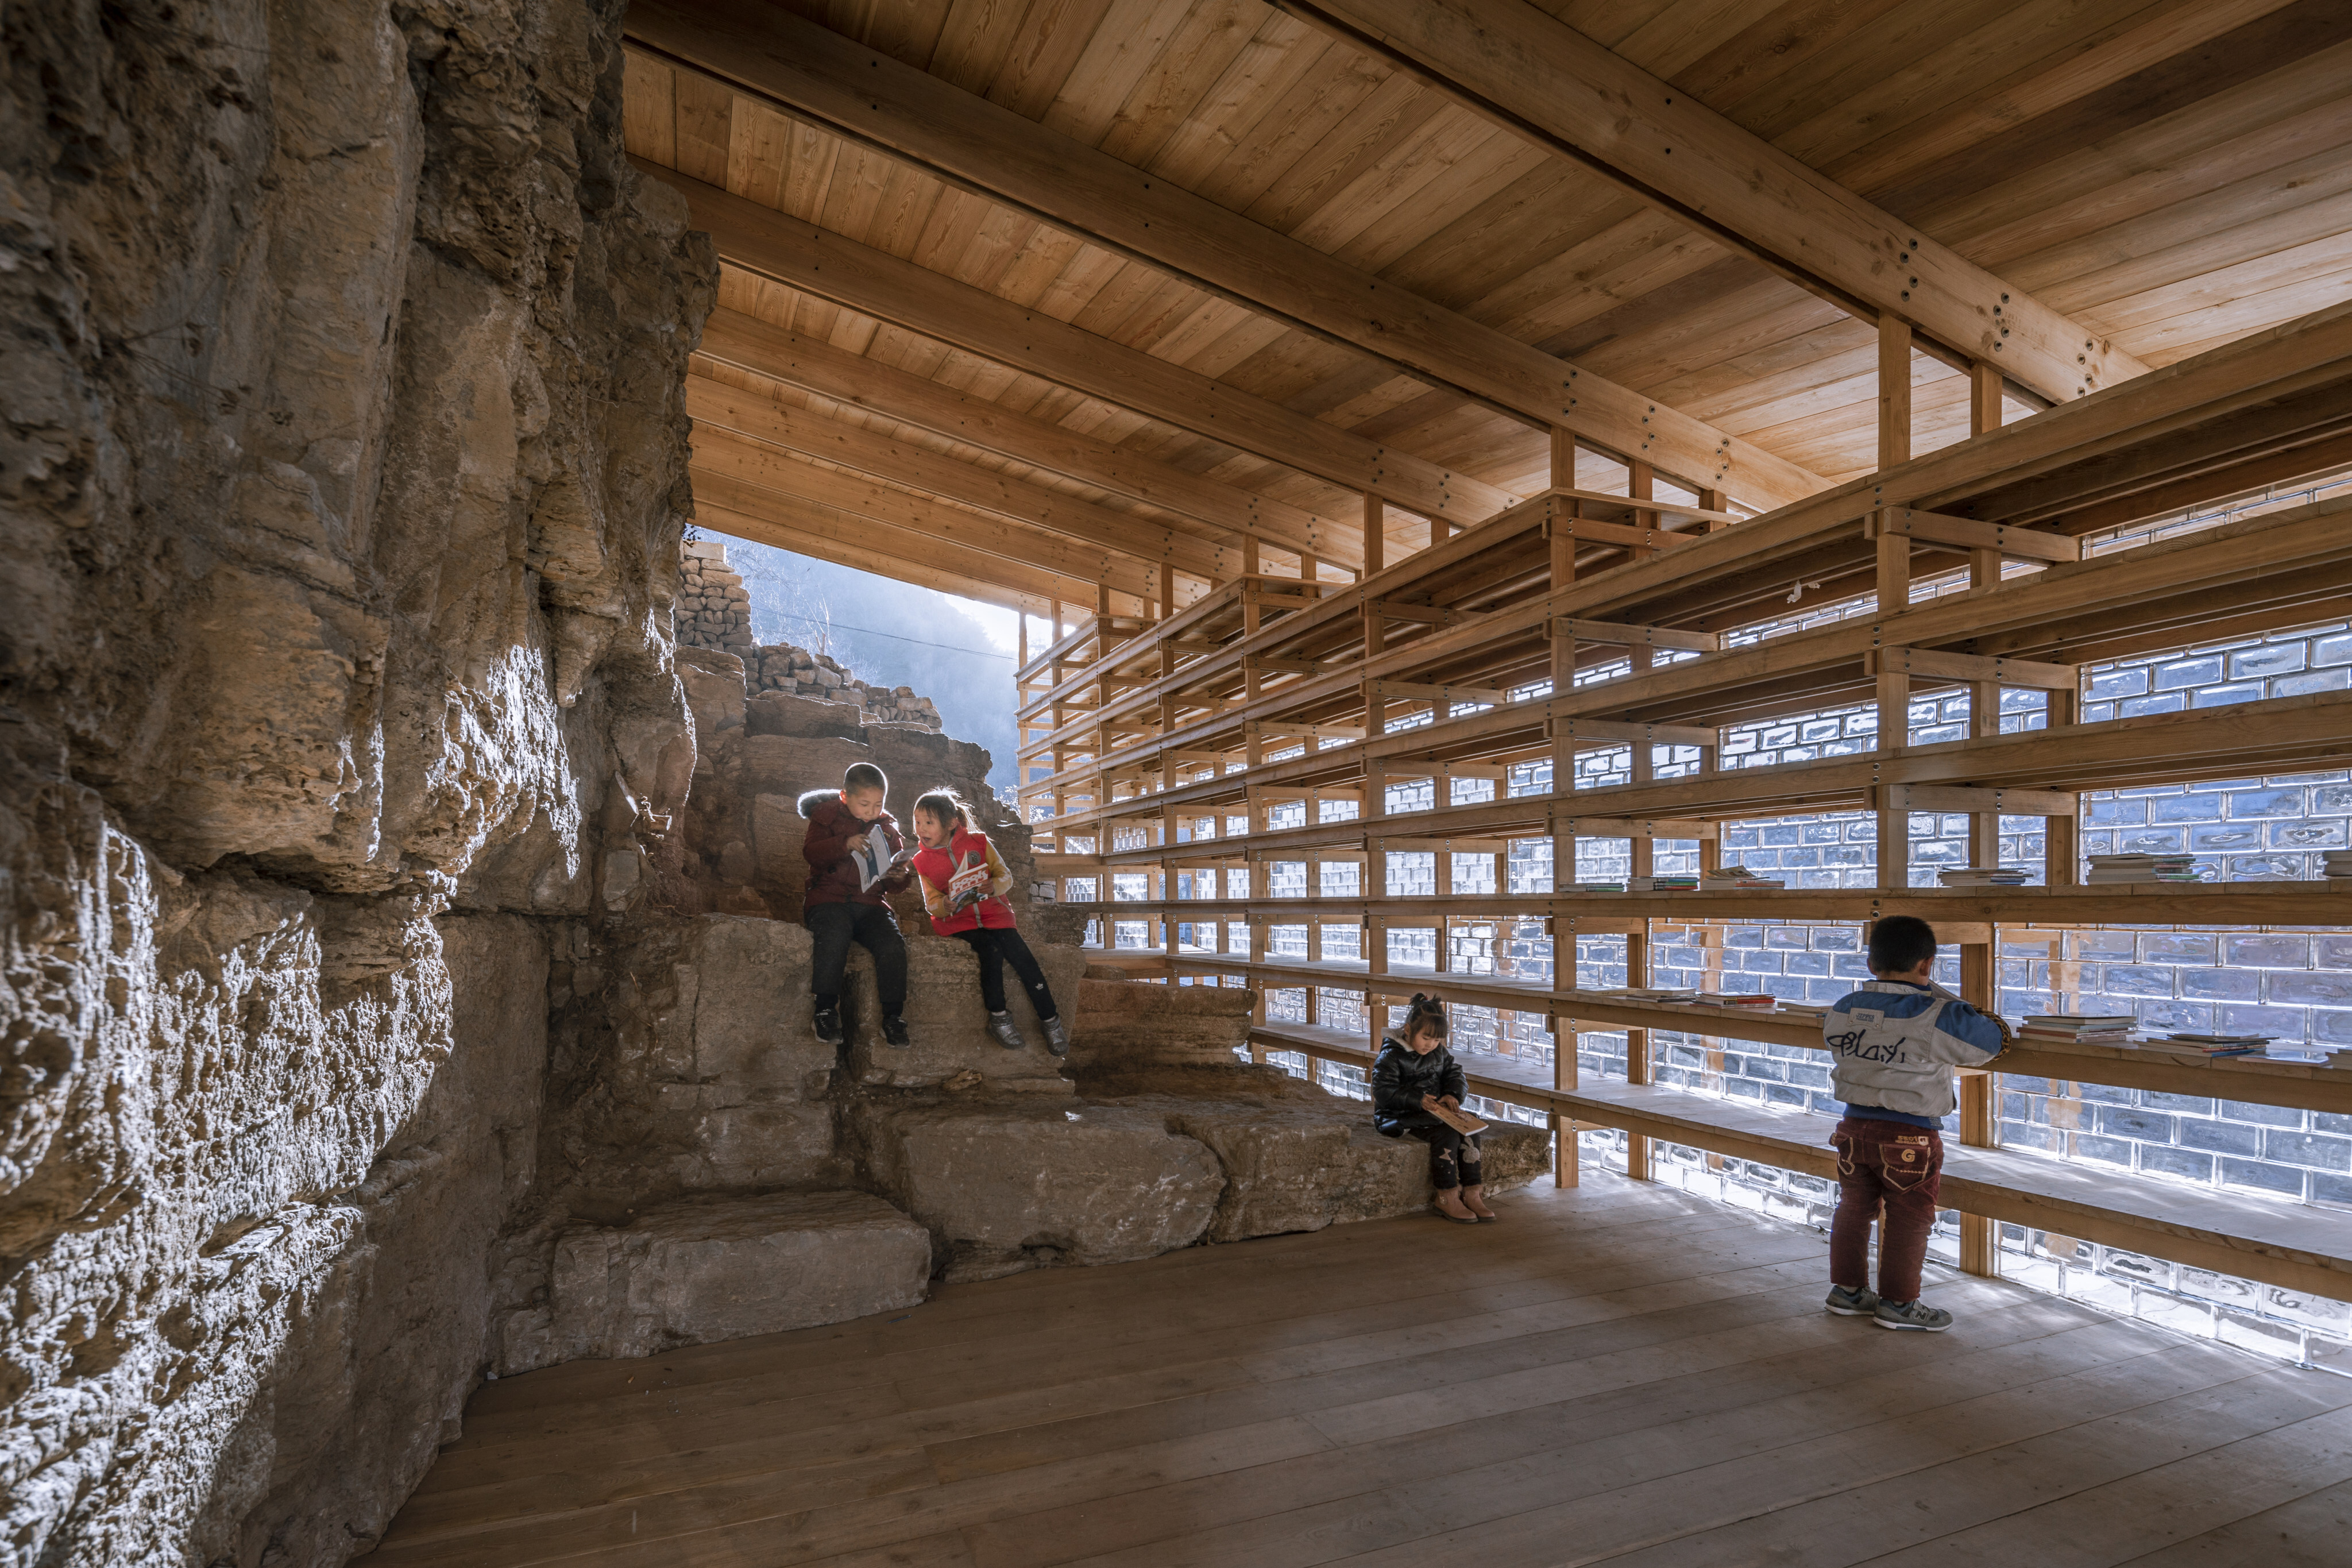 Nature Library in Zheshui Village, designed by LUO studio, the firm founded by Luo Yujie. He and another Beijing-based architect will be attending Business of Design Week 2021 in Hong Kong. Photo: Jin Weiqi